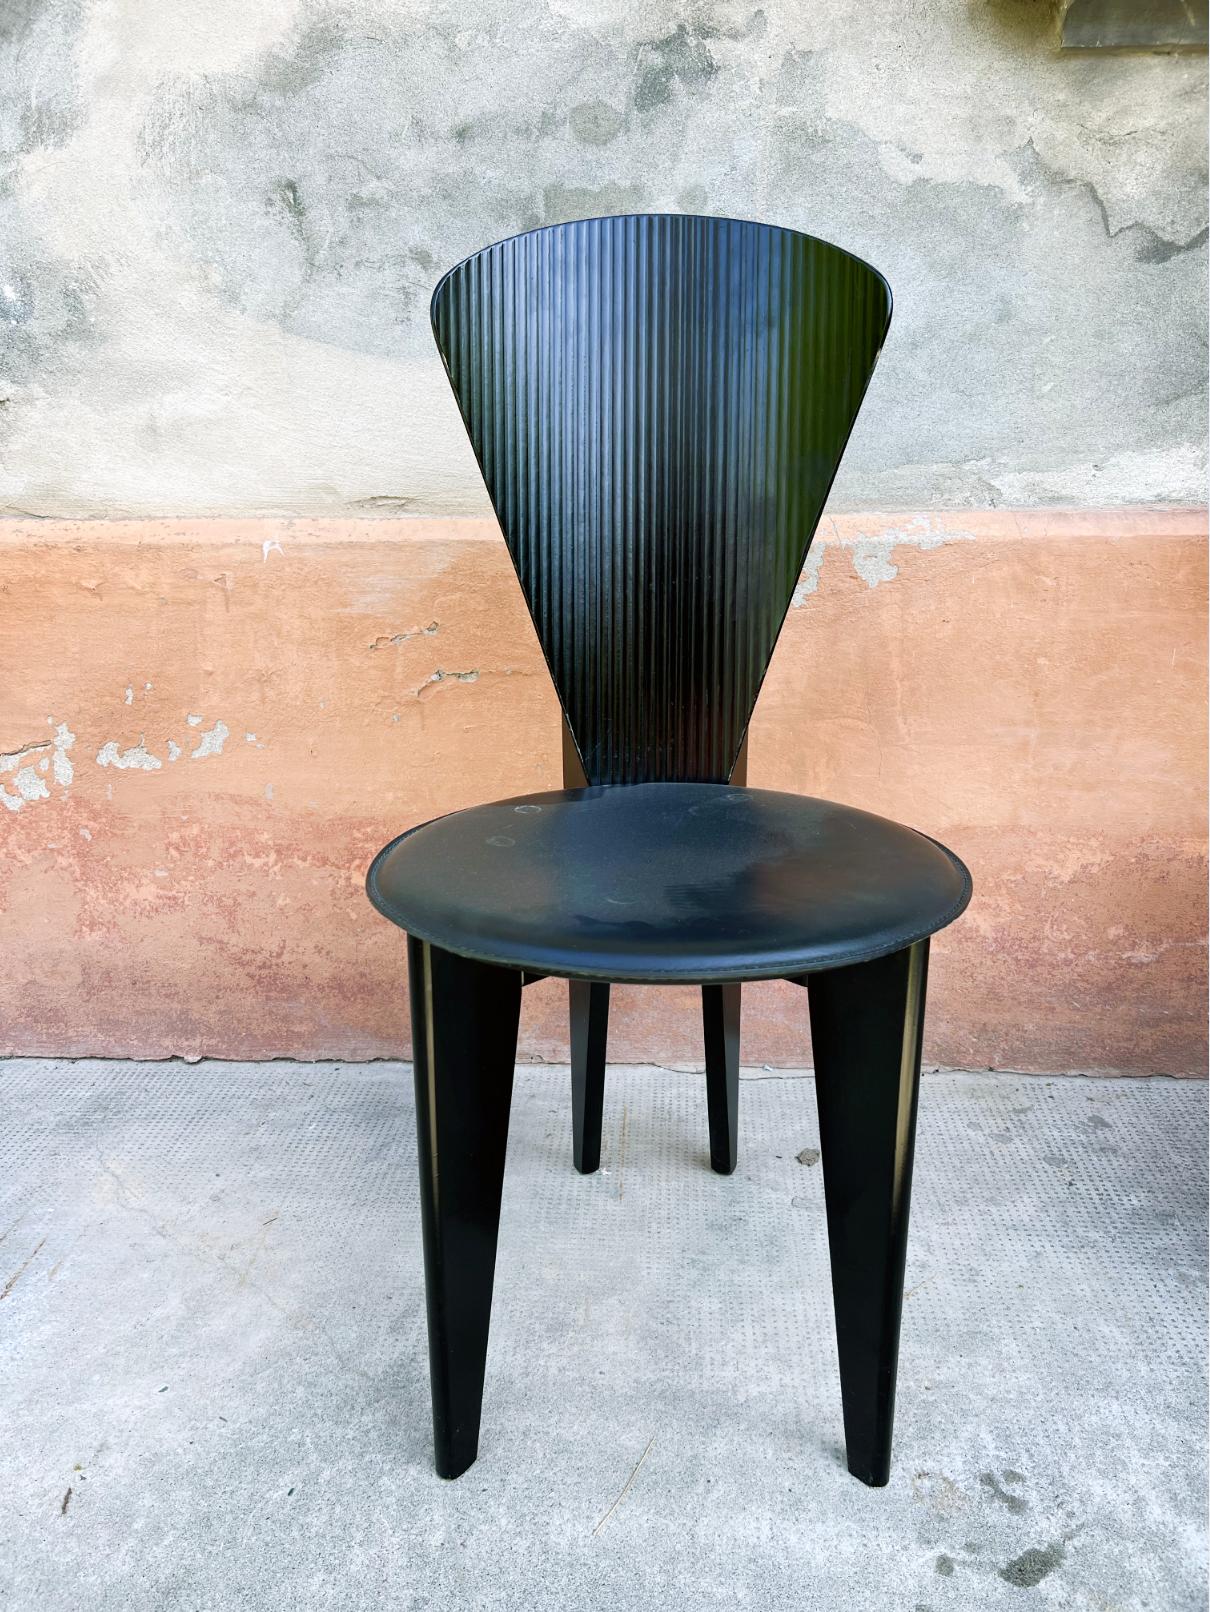 Circa 1980 - Calligaris Post Modern Chairs
Beautifully ribbed back , leather chairs, an example of post modern design.